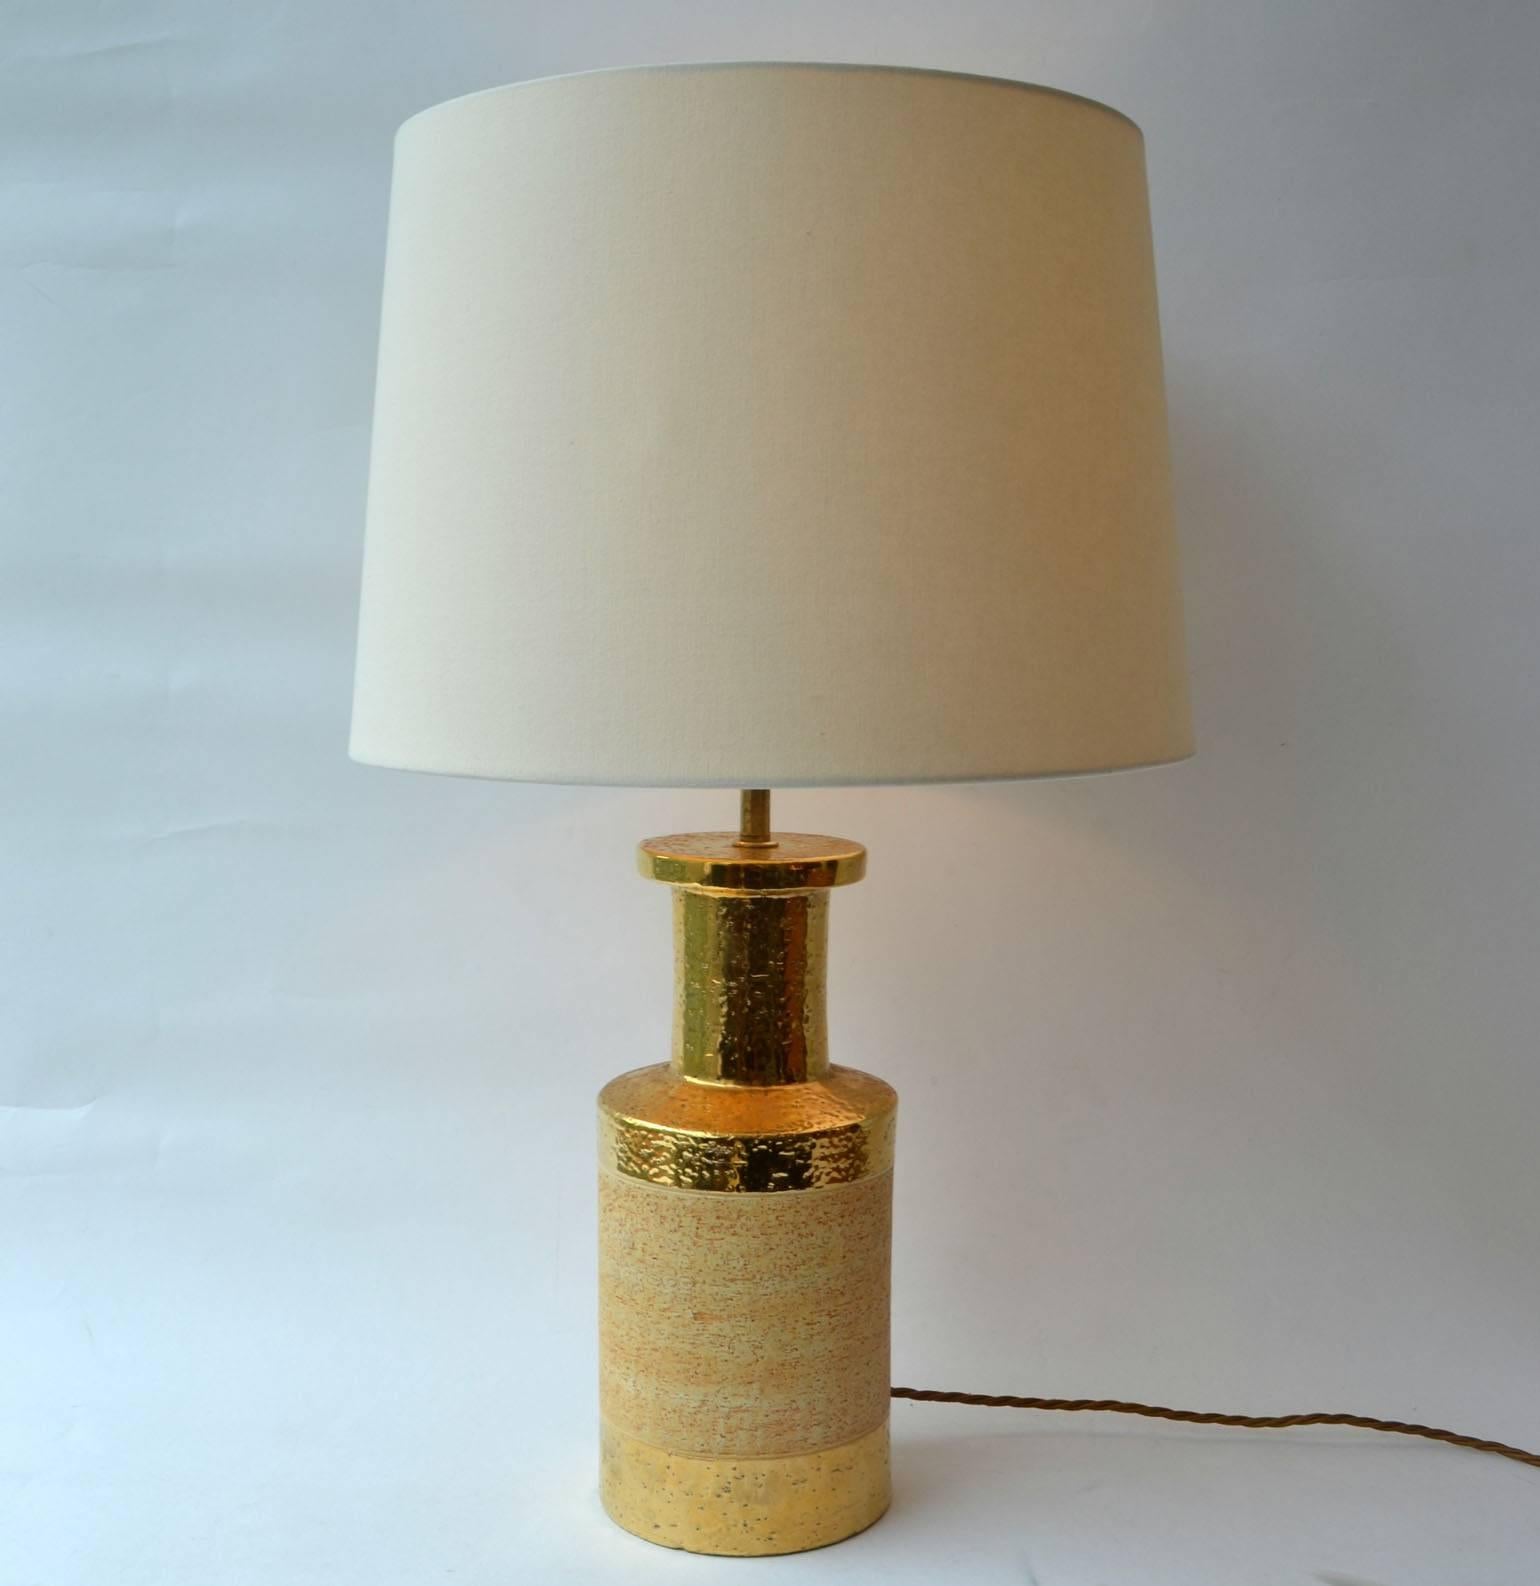 Pair of Bitossi Gilded Stoneware Ceramic Table Lamps, Italy 1970s For Sale 10